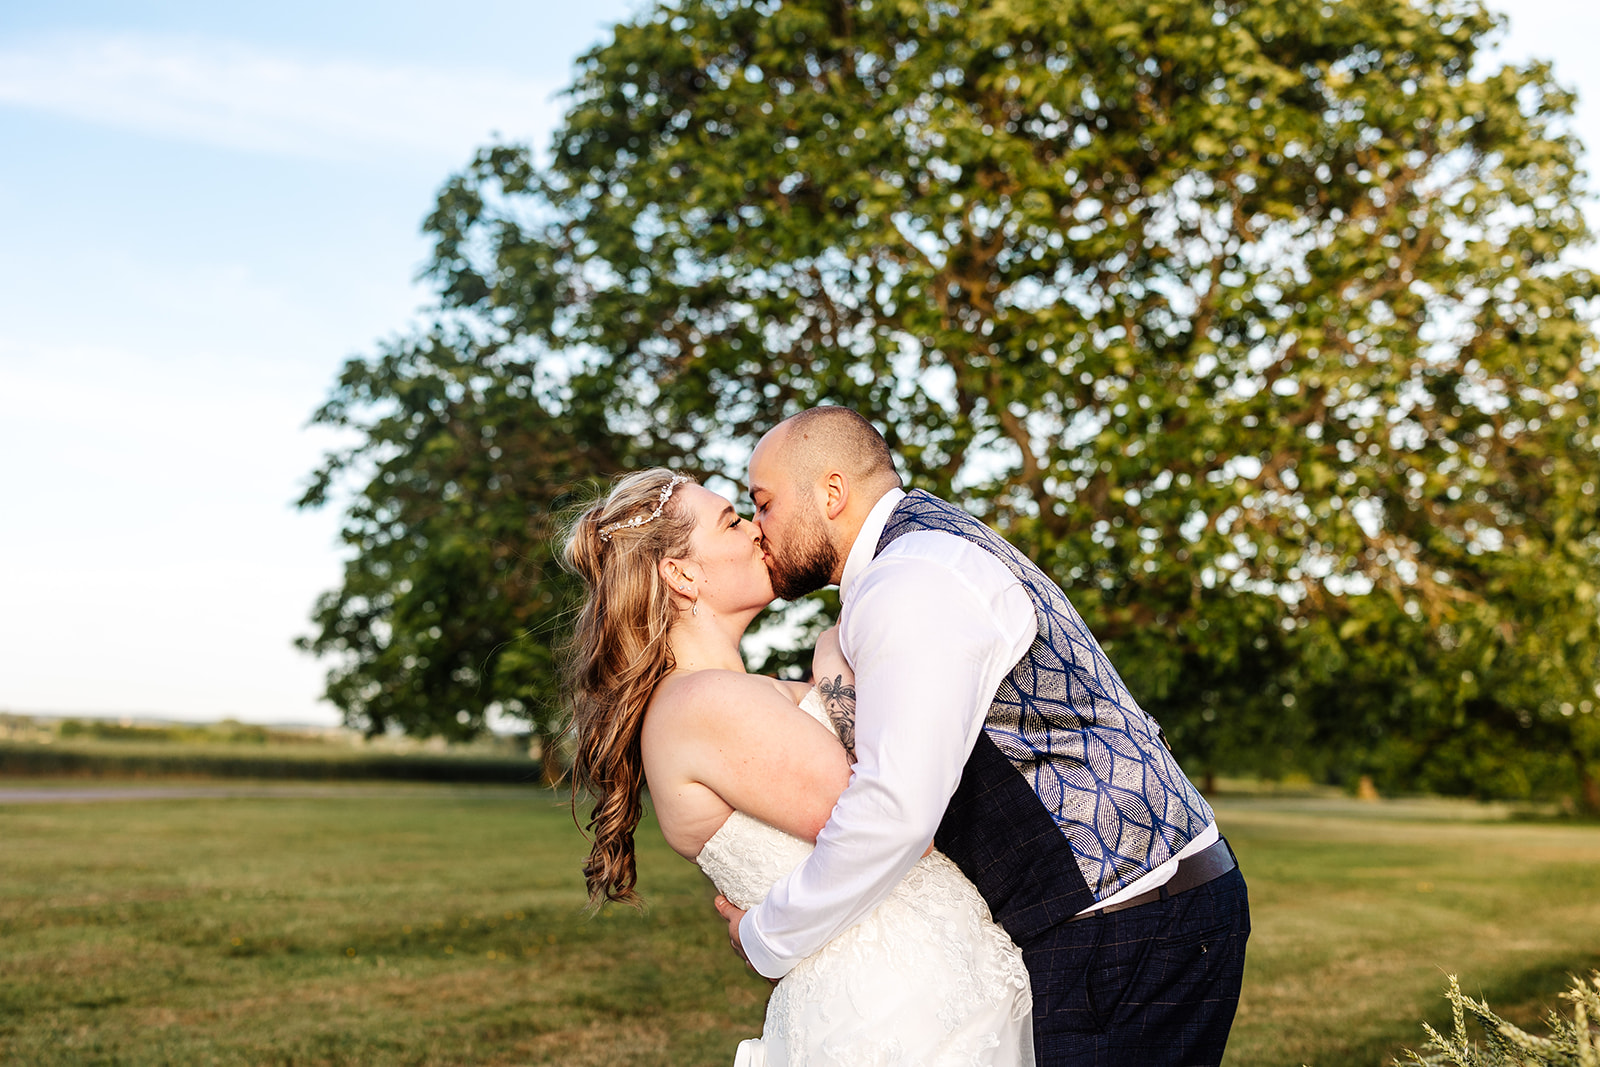 Couple share kiss outside with trees in the background. Bride is dipped by groom 